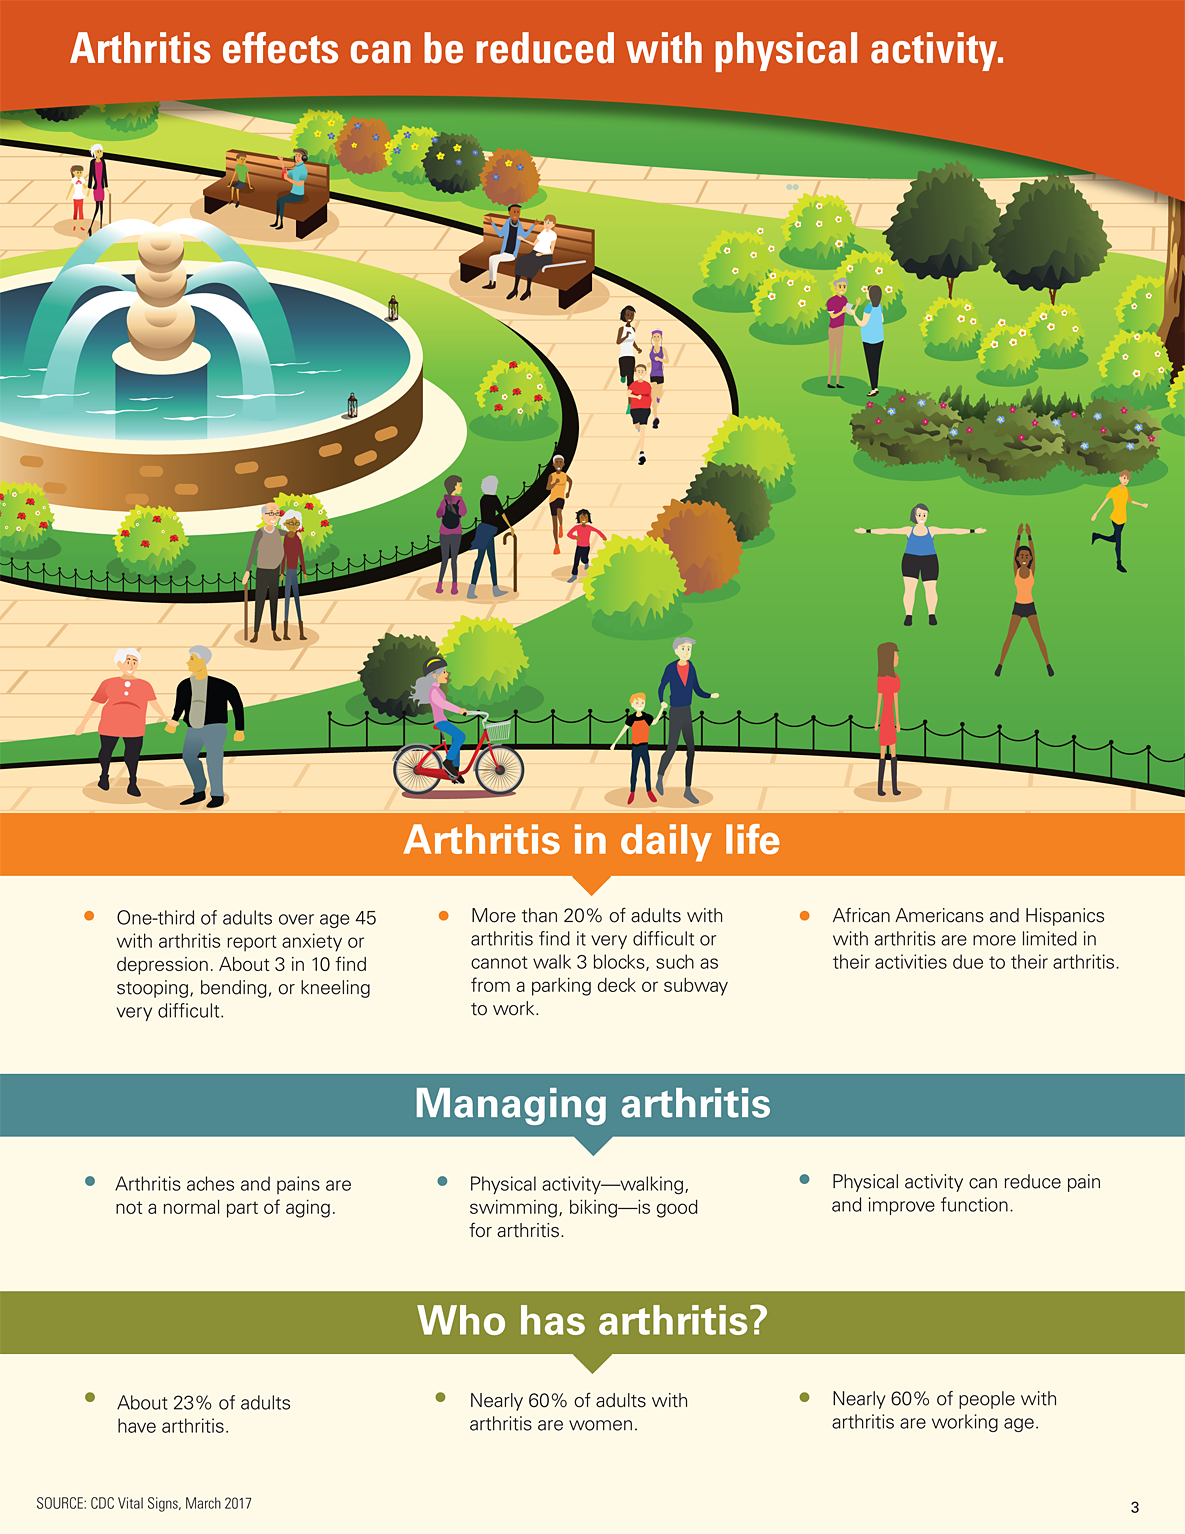 Arthritis effects can be reduced with daily physical activity